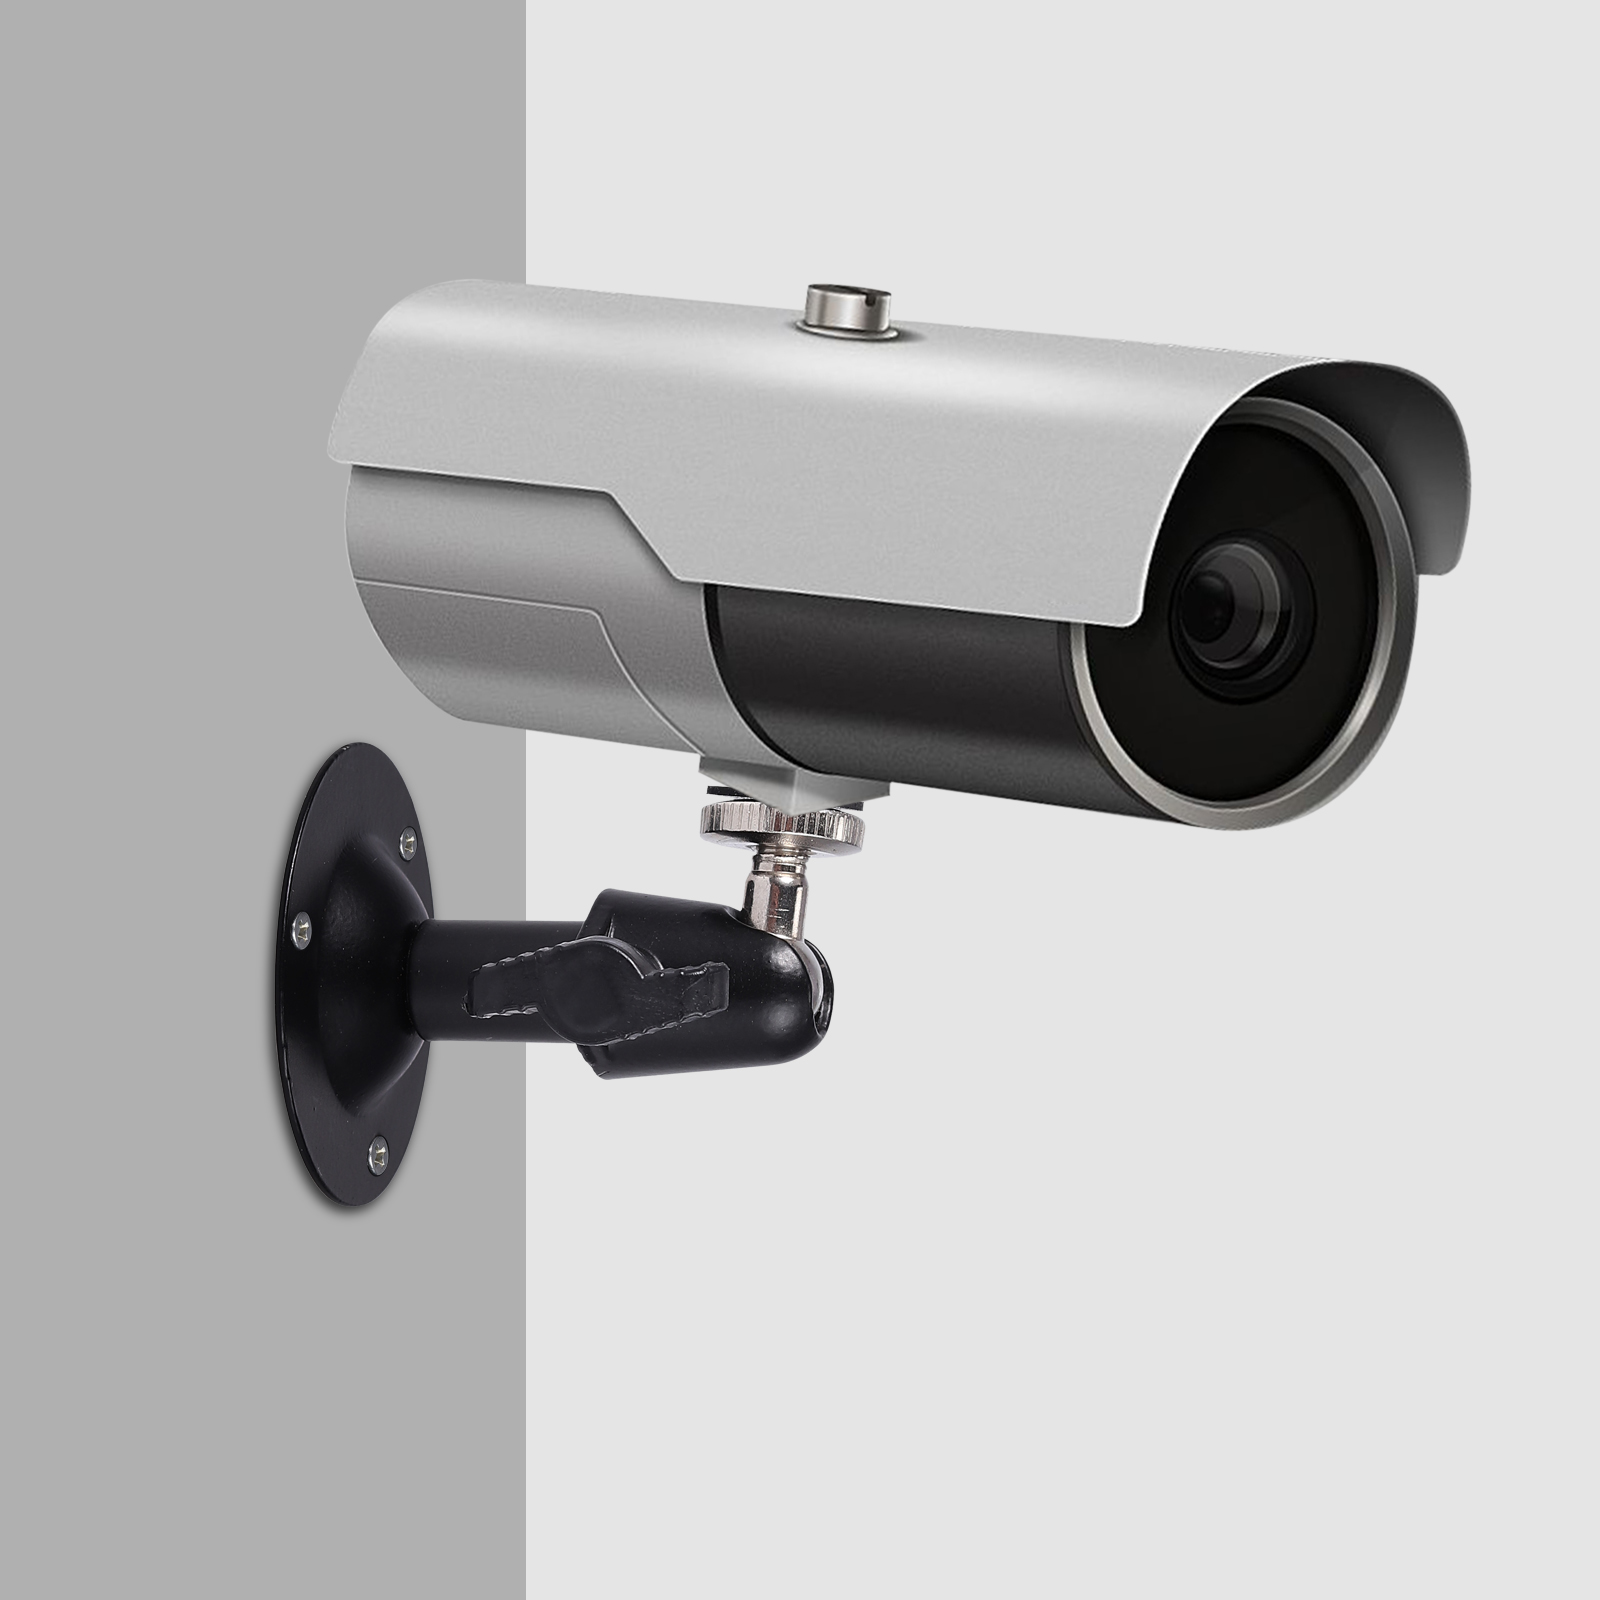 What does CCTV stand for in security?